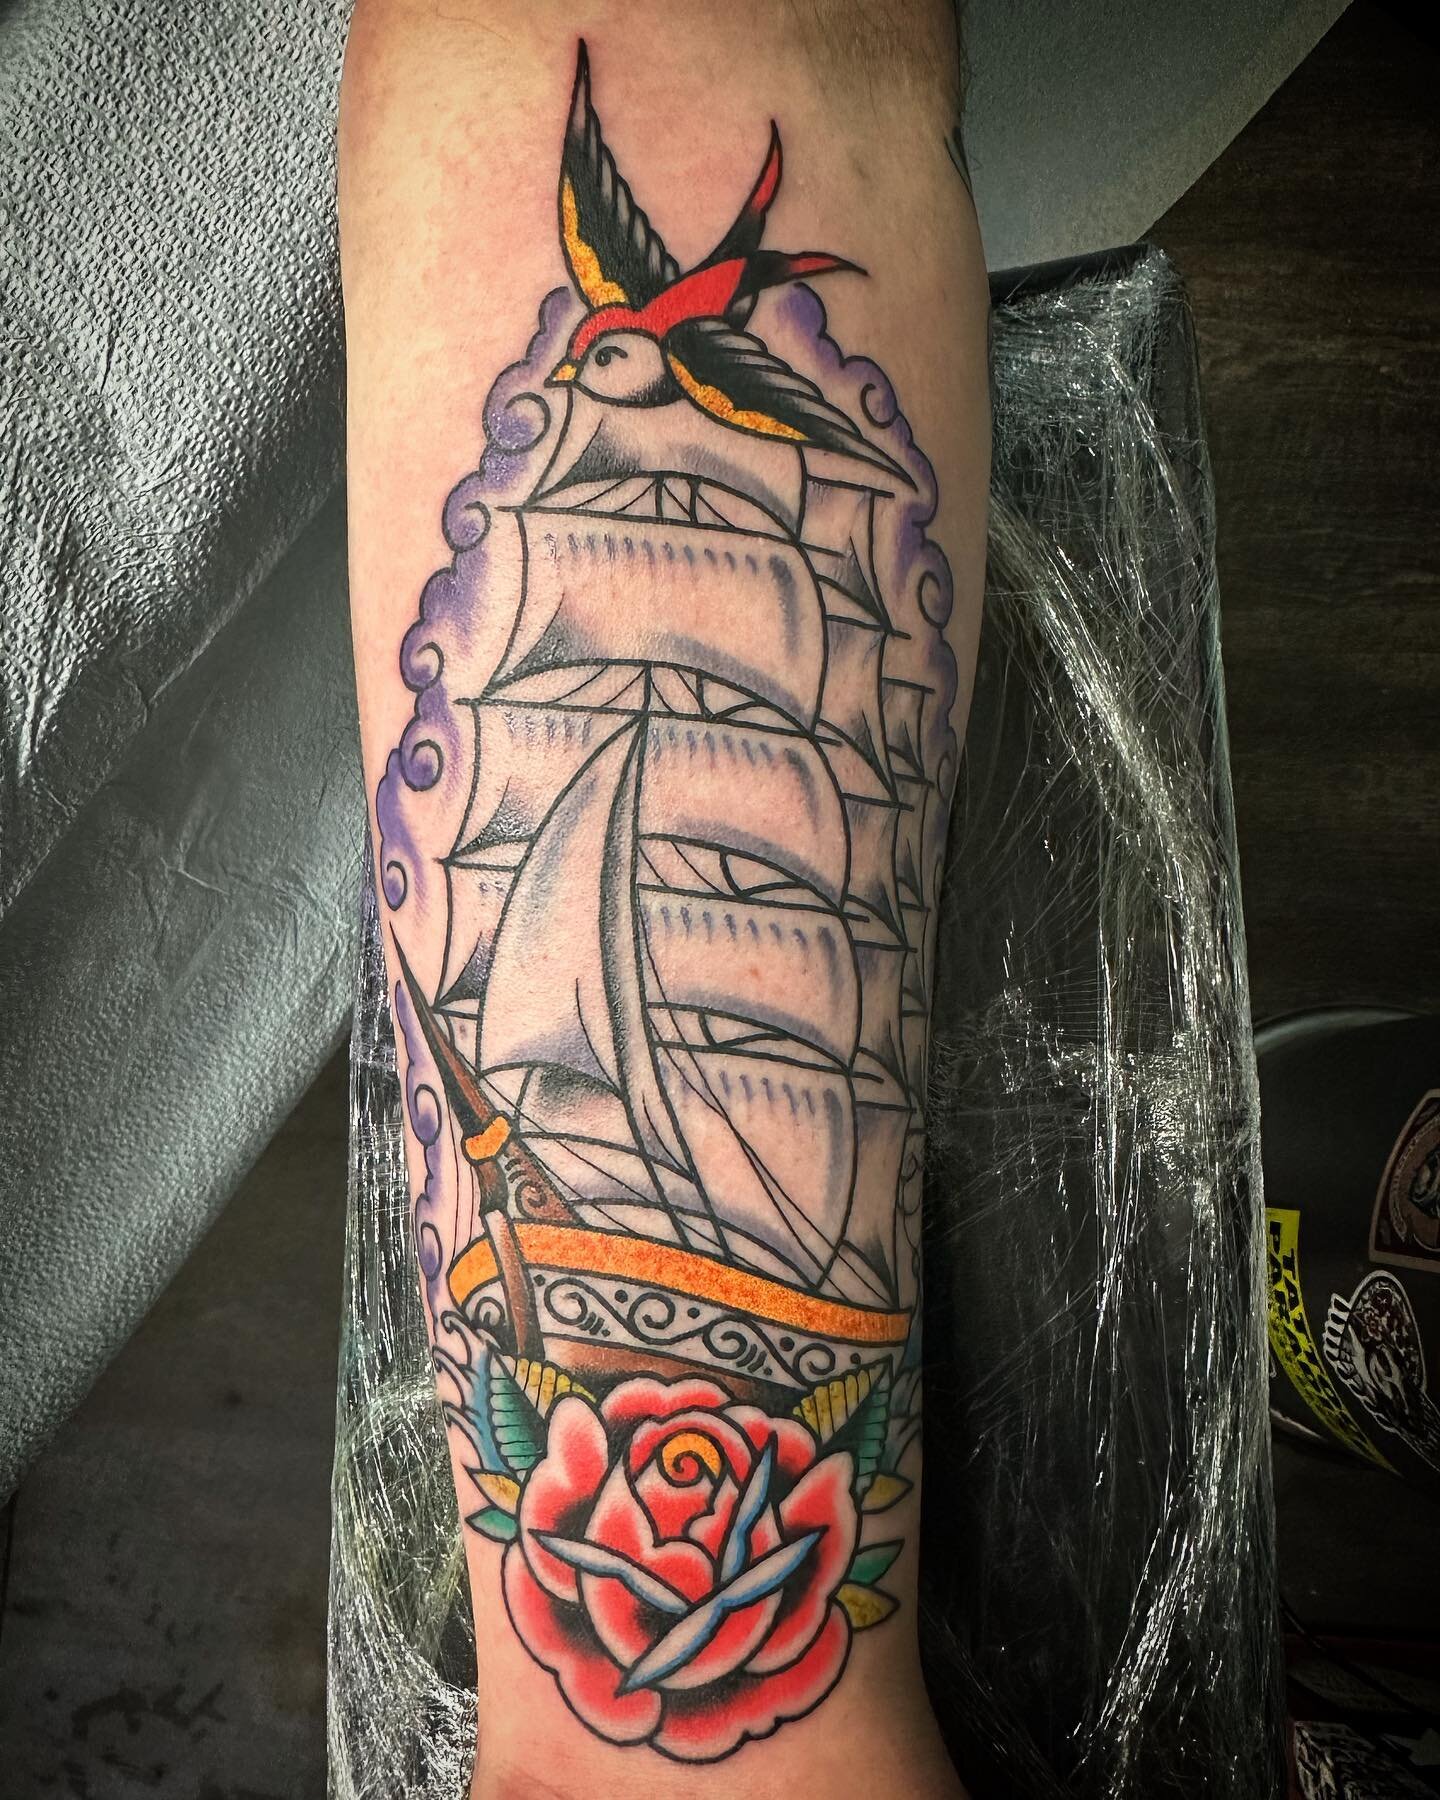 Here&rsquo;s a clipper ship, enjoy! For appointments or questions email jtbtattoo@gmail.com Thanks for looking